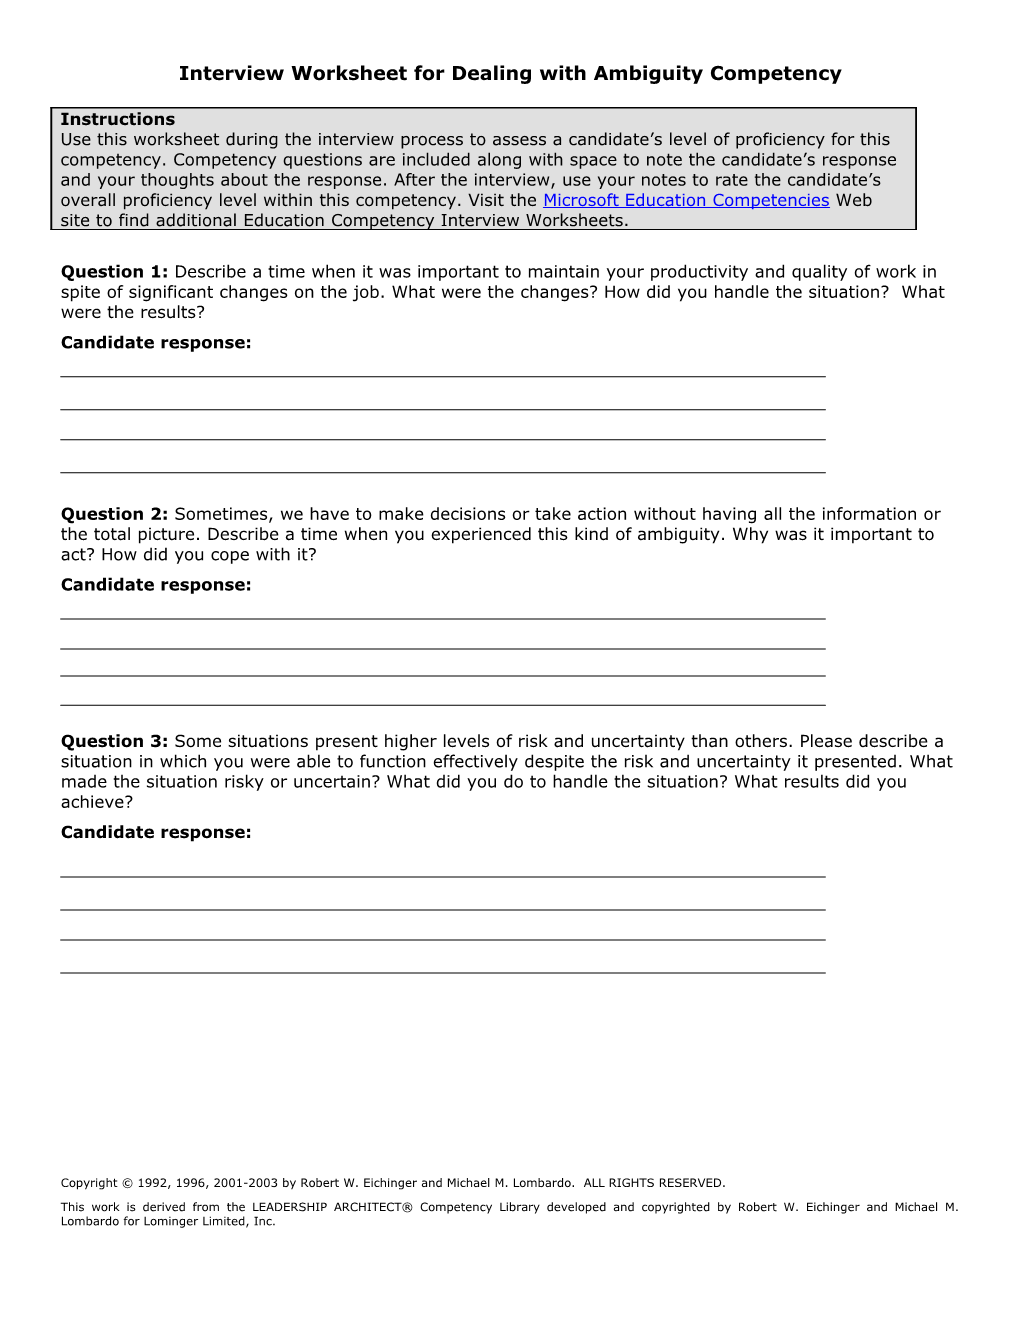 Interview Worksheet for Dealing with Ambiguity Competency